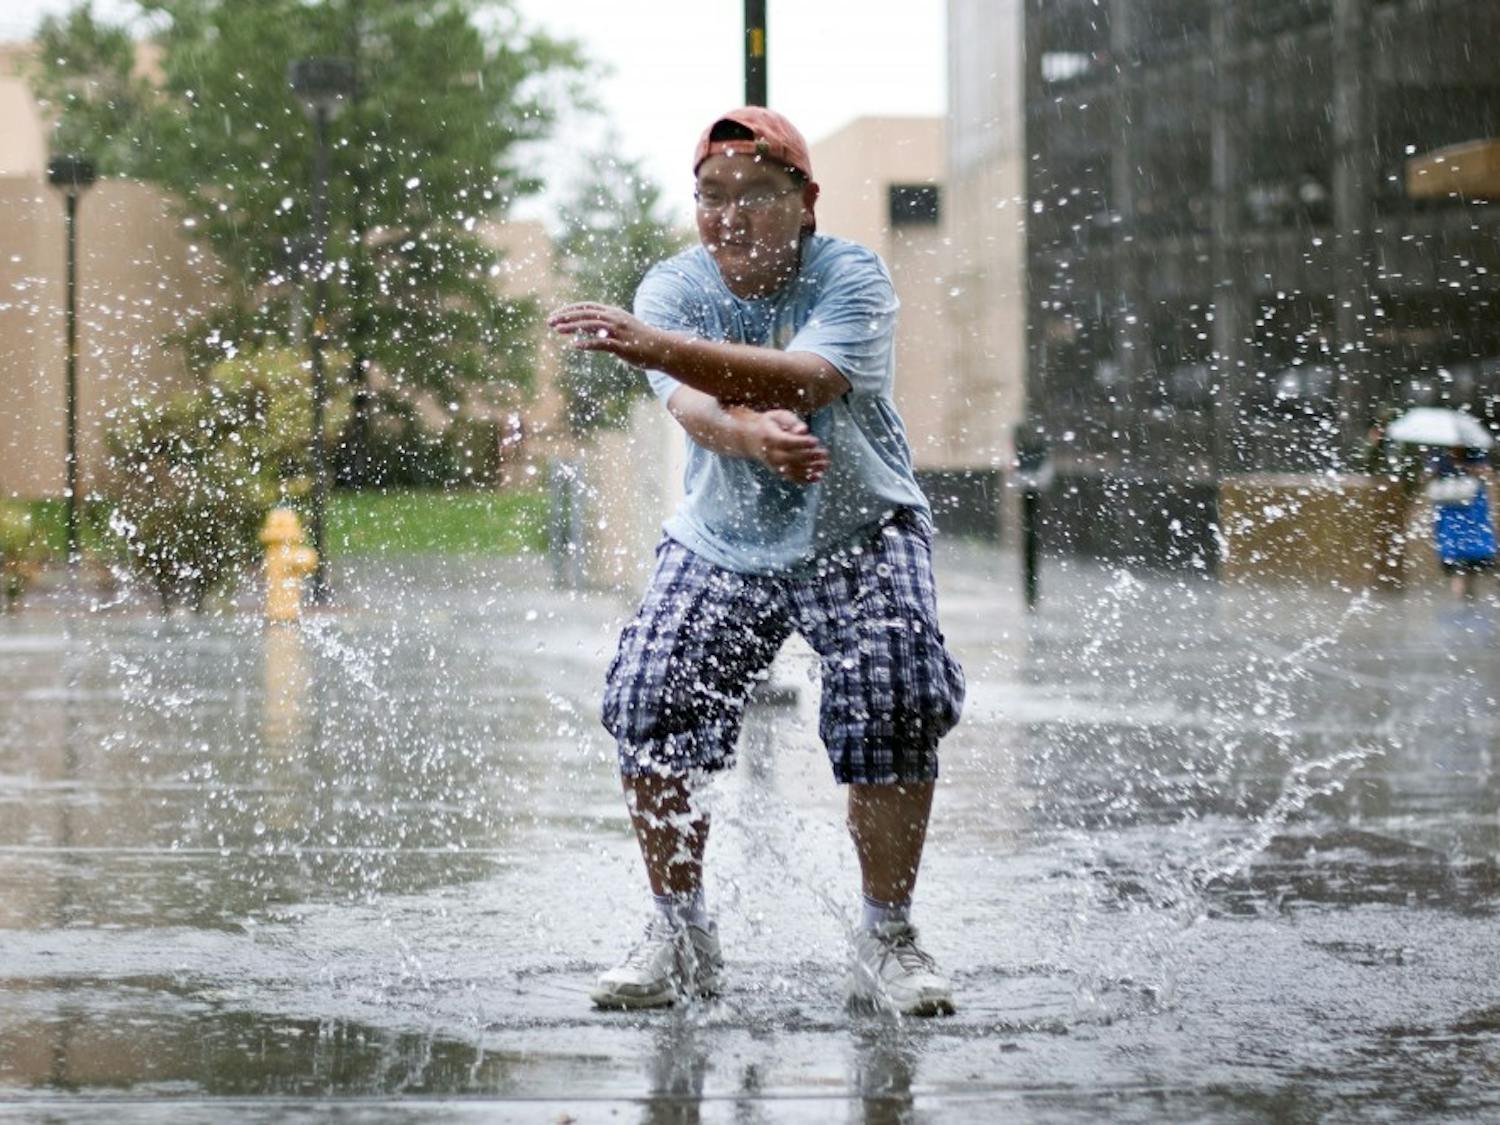 	Alan Duong, a seventh-grader at Albuquerque Academy, splashes in a puddle outside of Popejoy Hall on Thursday. Duong and other students visited campus for a photography class.